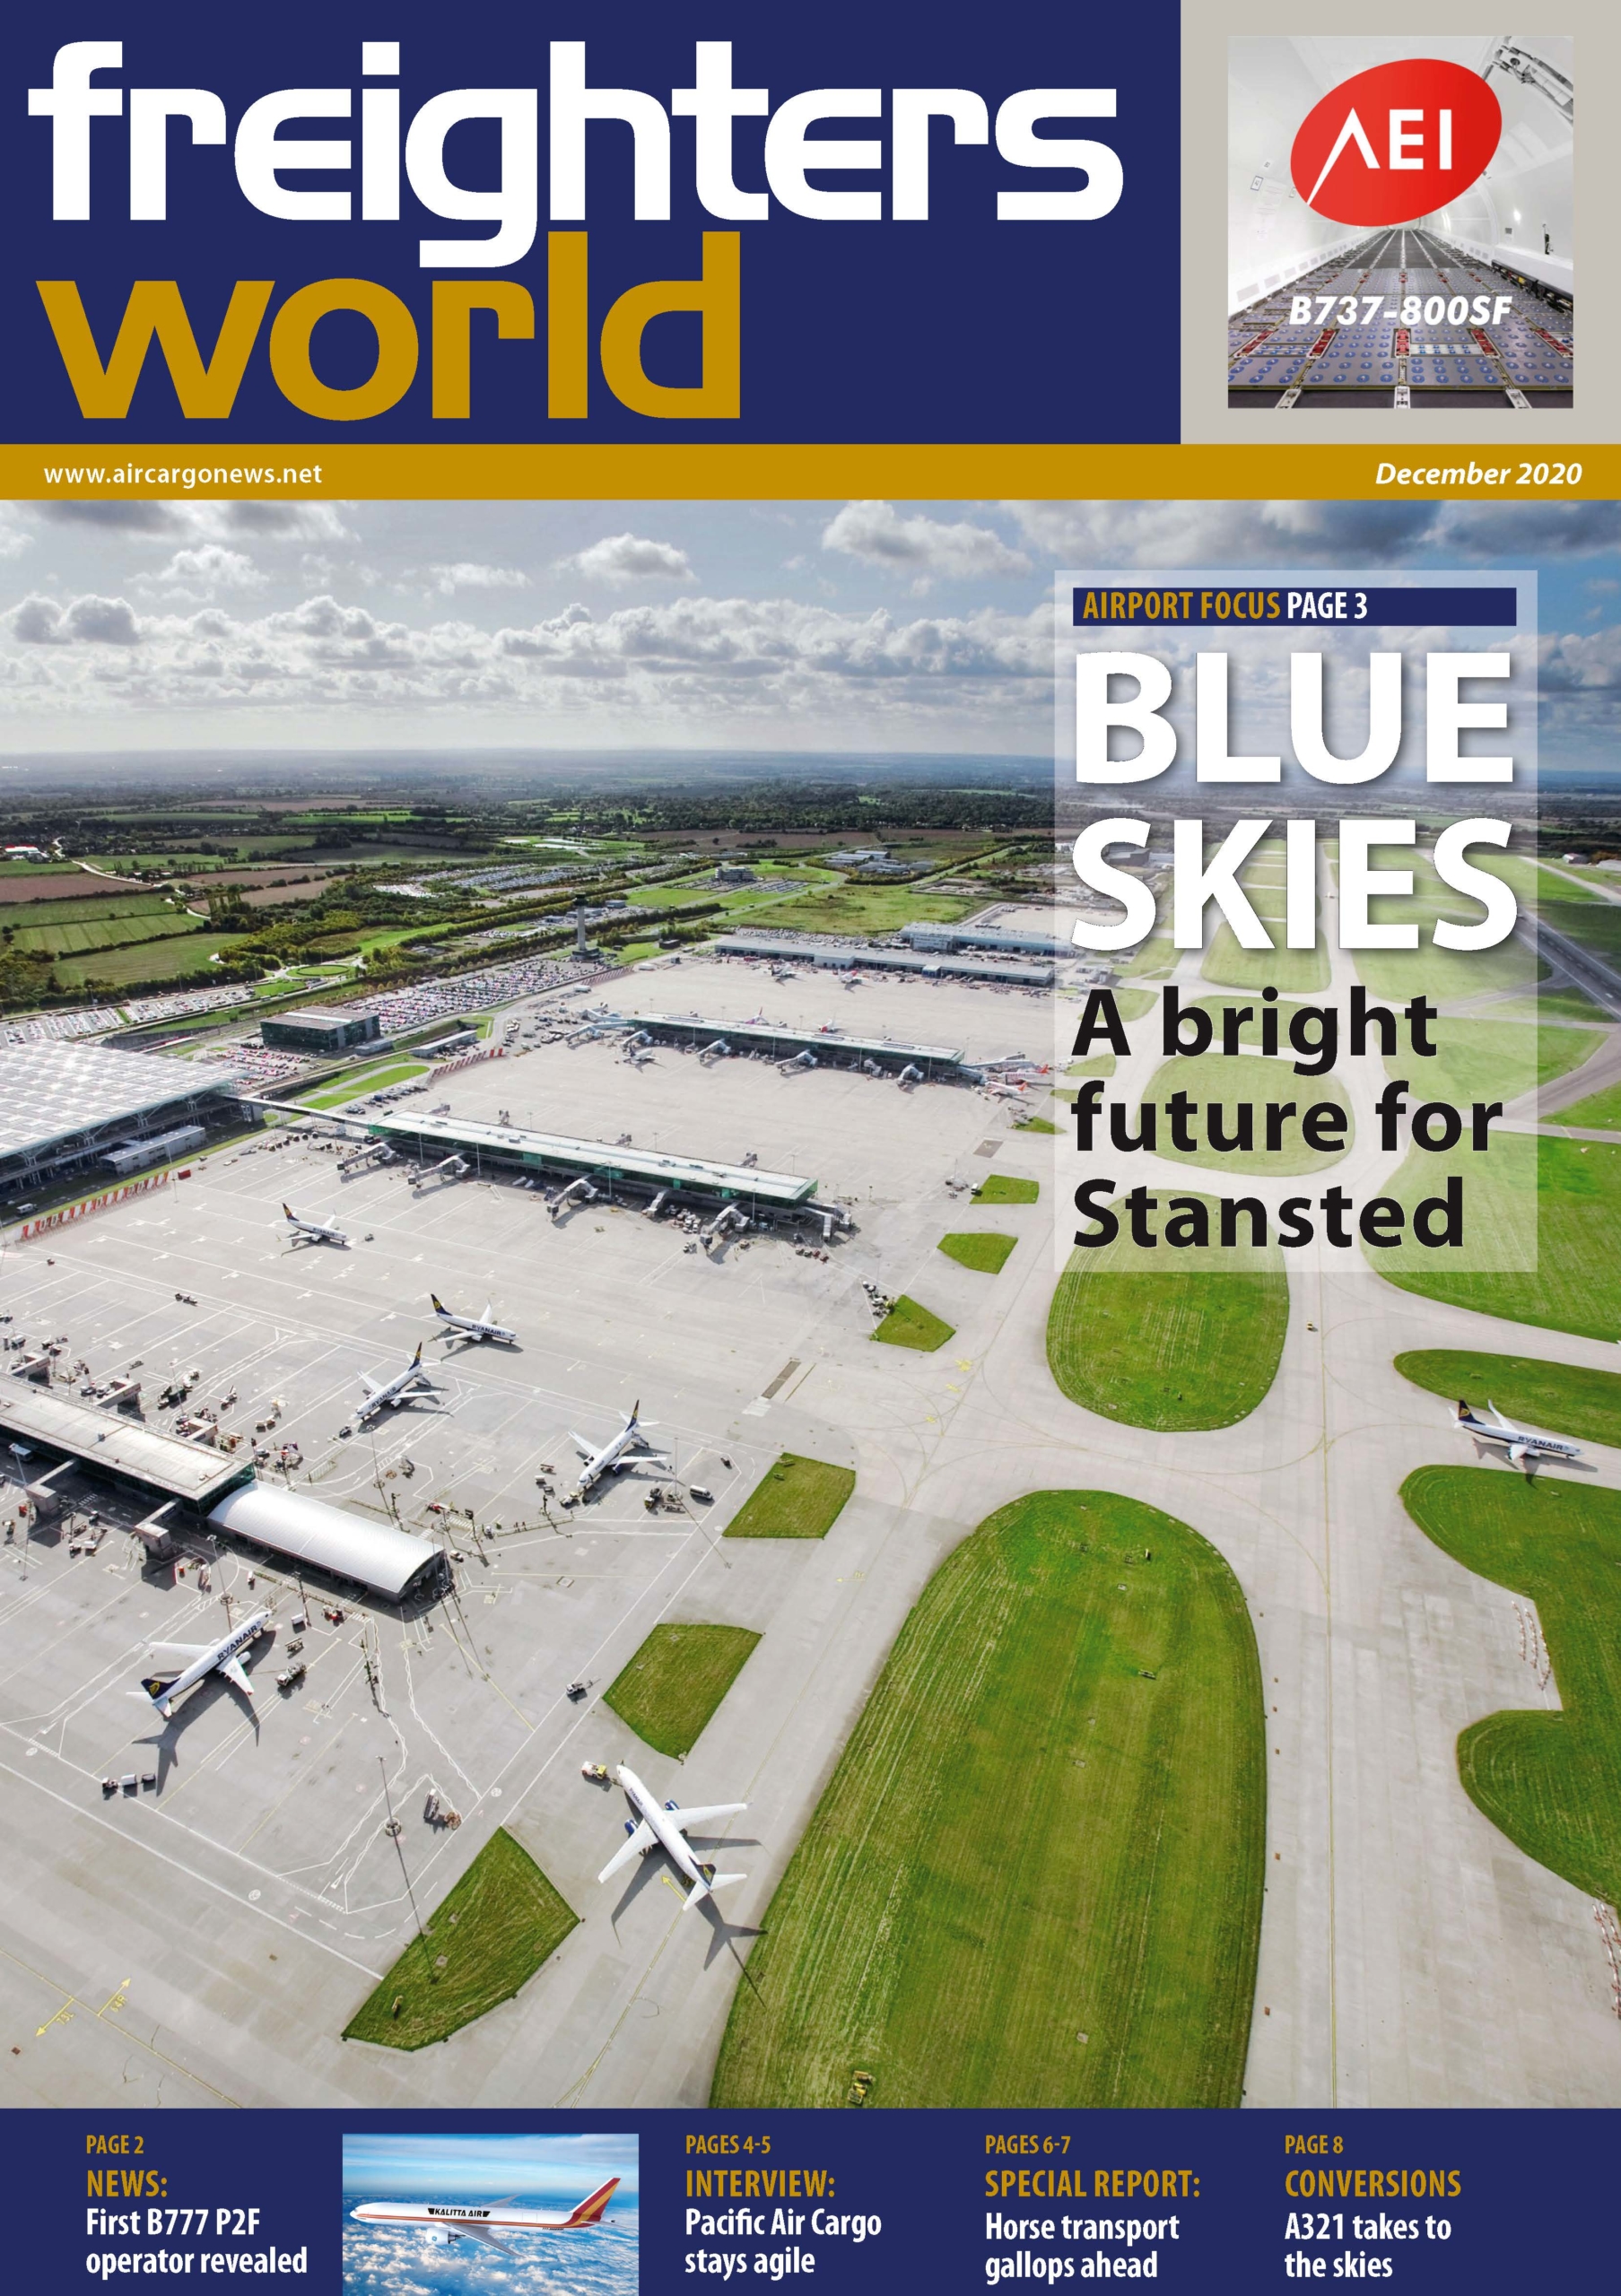 Freighters World Dec 2020 Cover